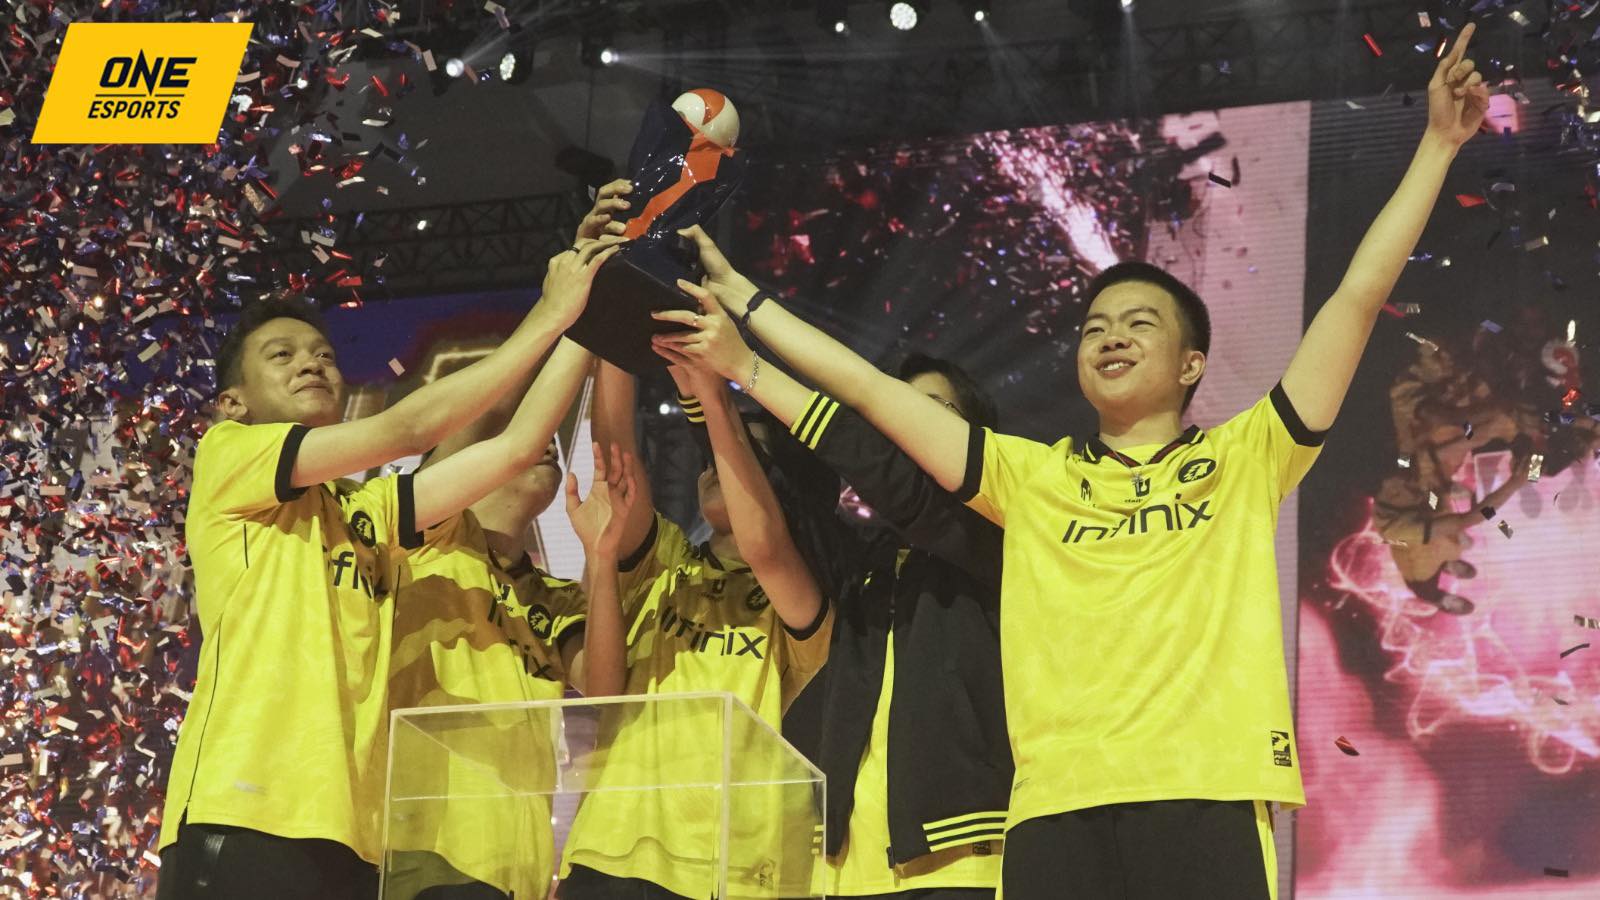 ONIC Esports lift their championship trophy after winning the ESL Snapdragon Pro Series Season 3 on July 23 at the Istora Senayan in Jakarta, Indonesia.